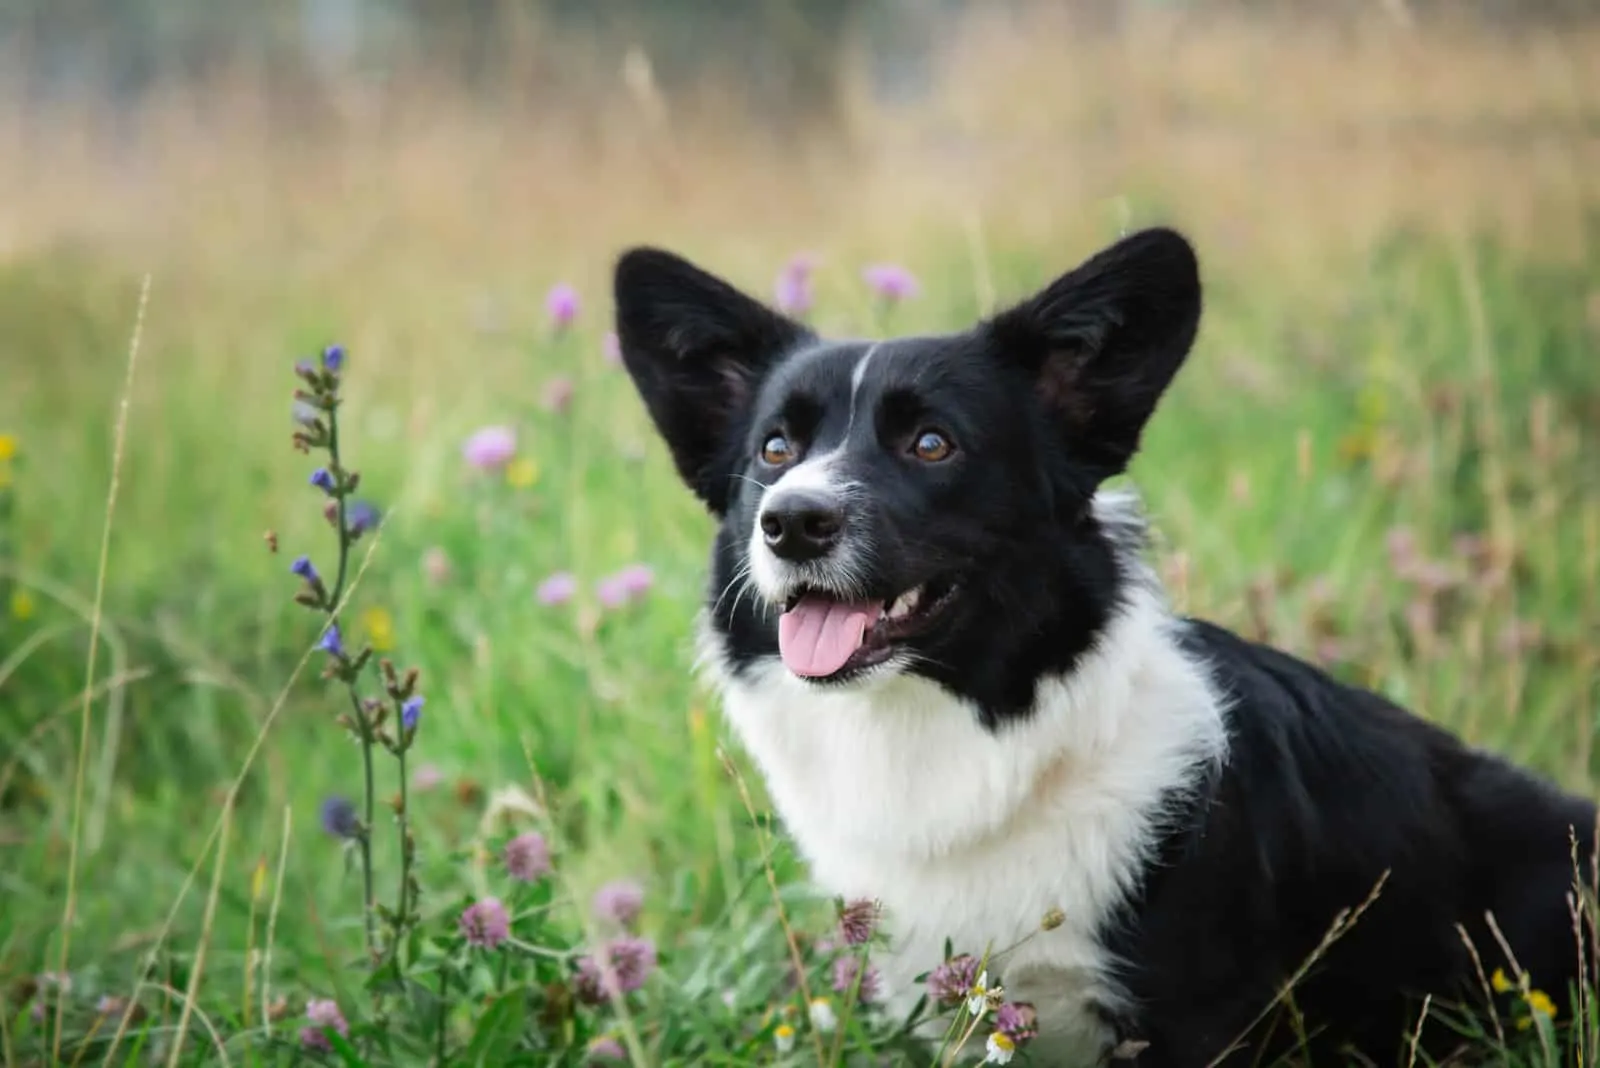 young black and white welsh corgi cardigan on the grass in flowers